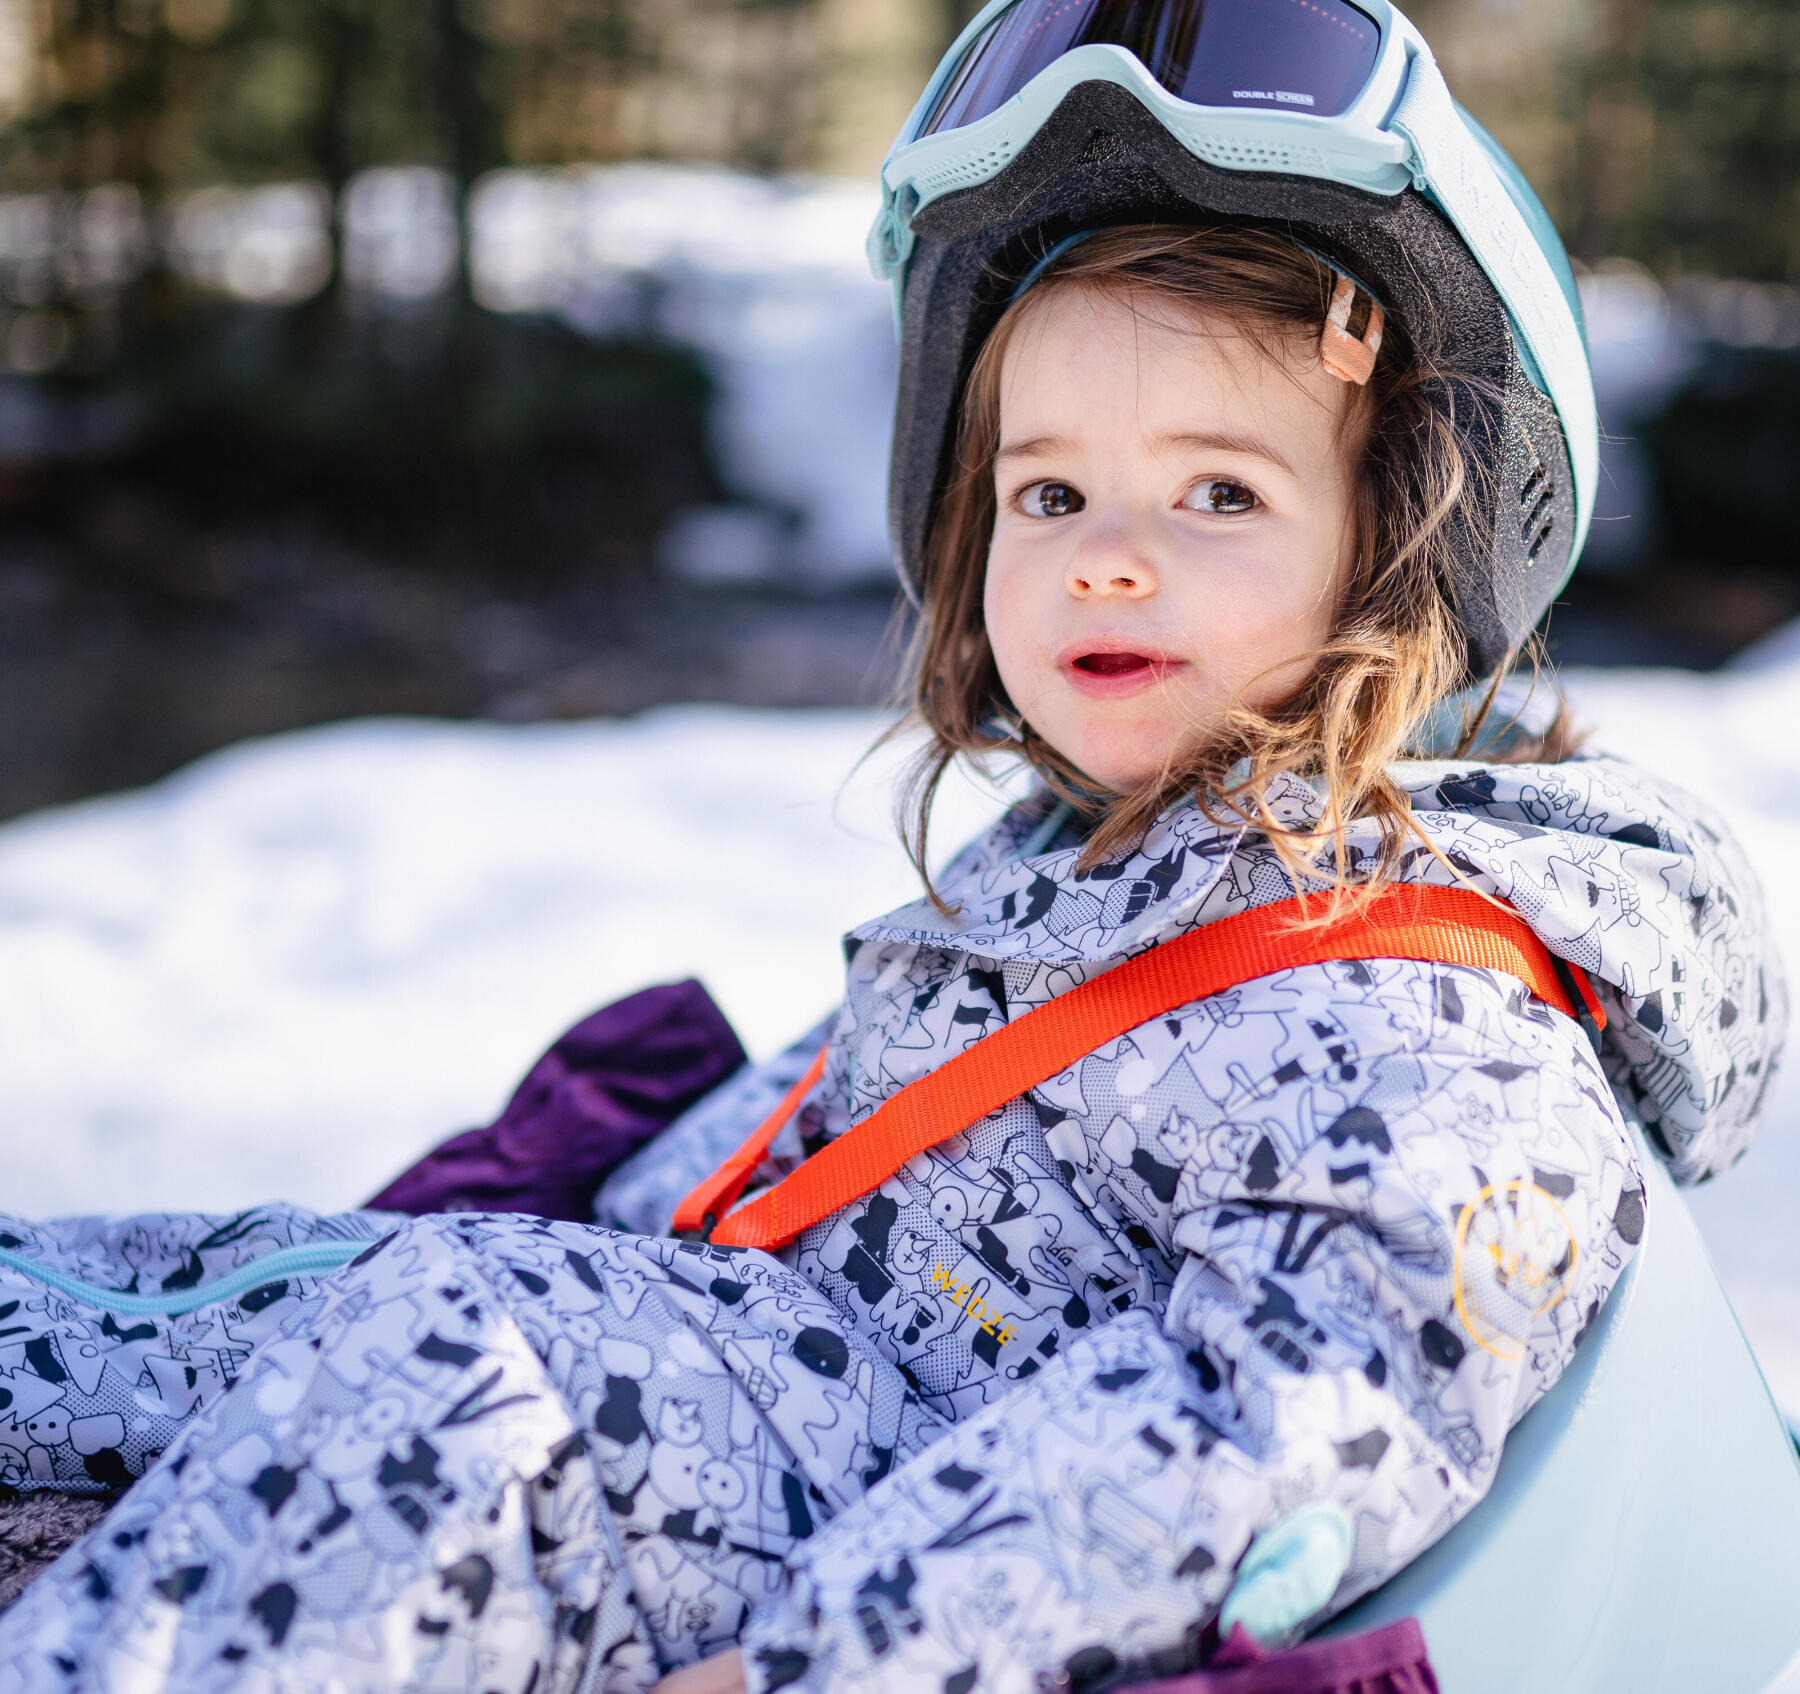 Looking after and repairing your child's ski suit properly